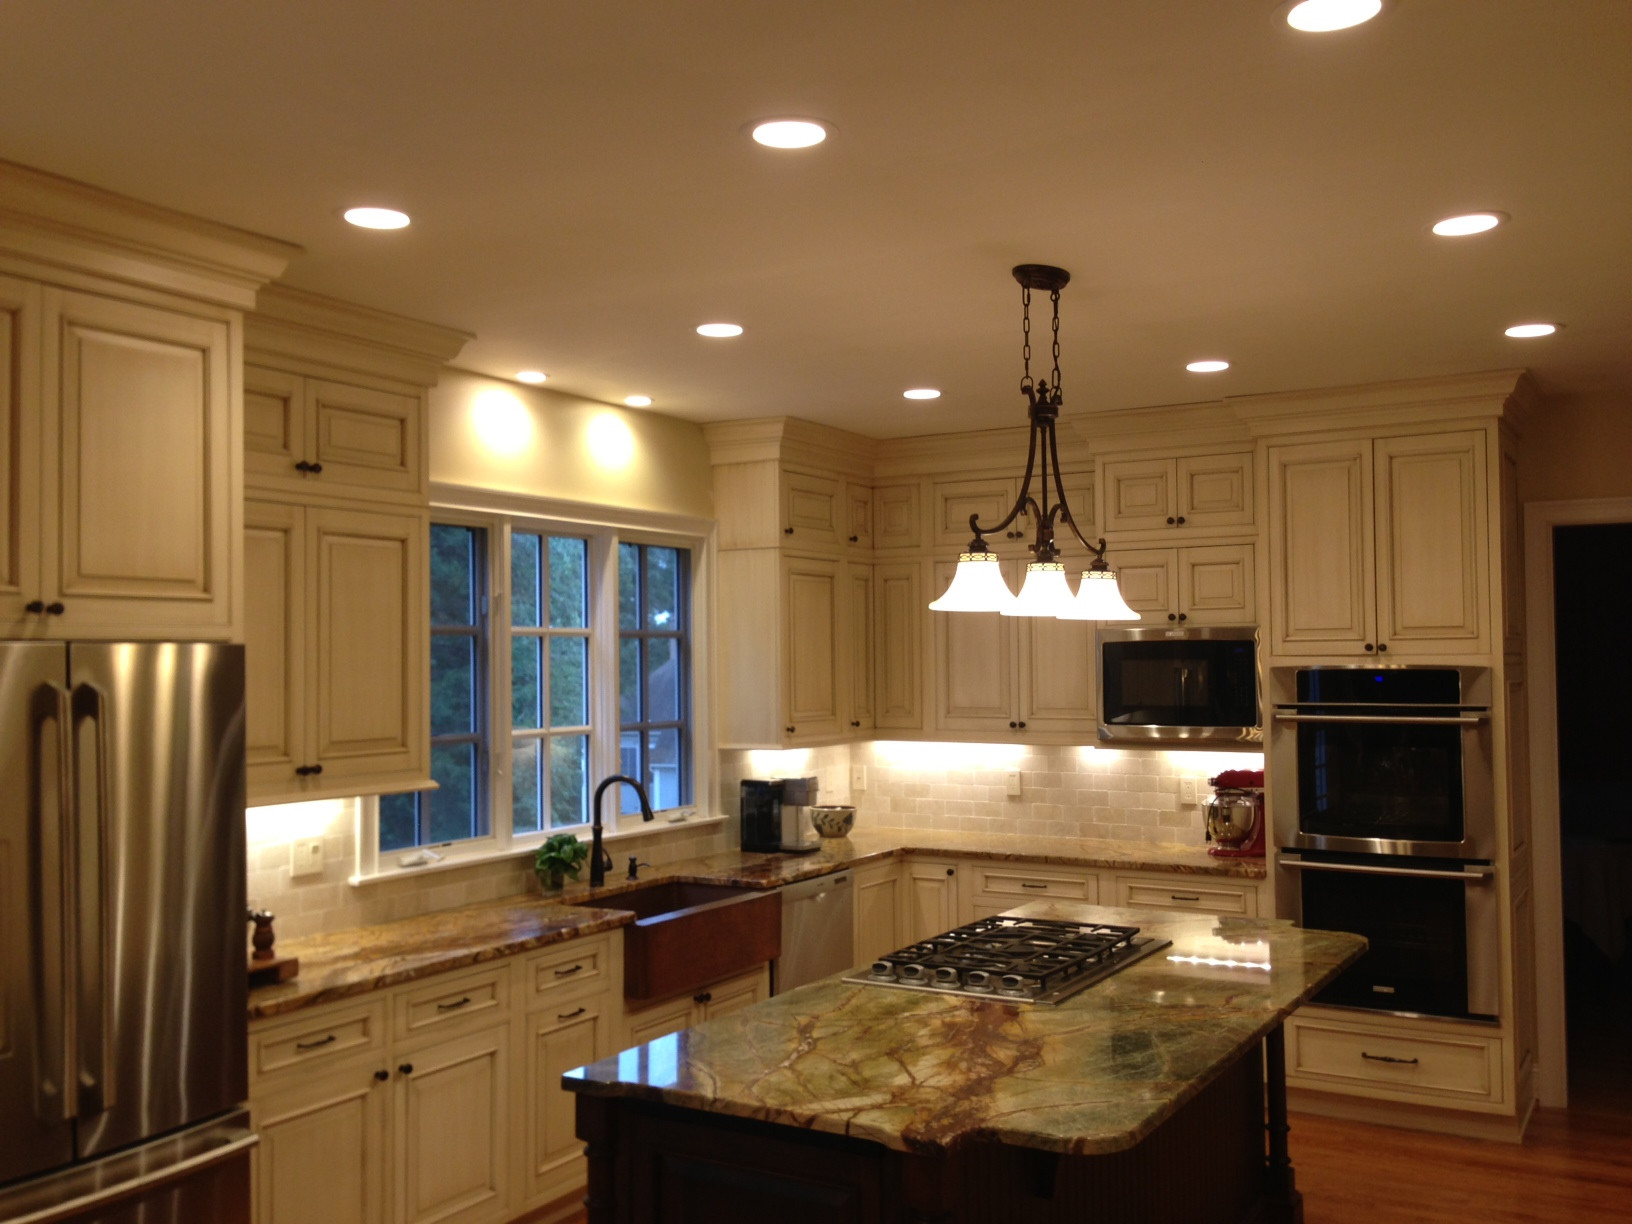 Recessed Lighting In Kitchens
 Pot Lighting In Kitchen BClight